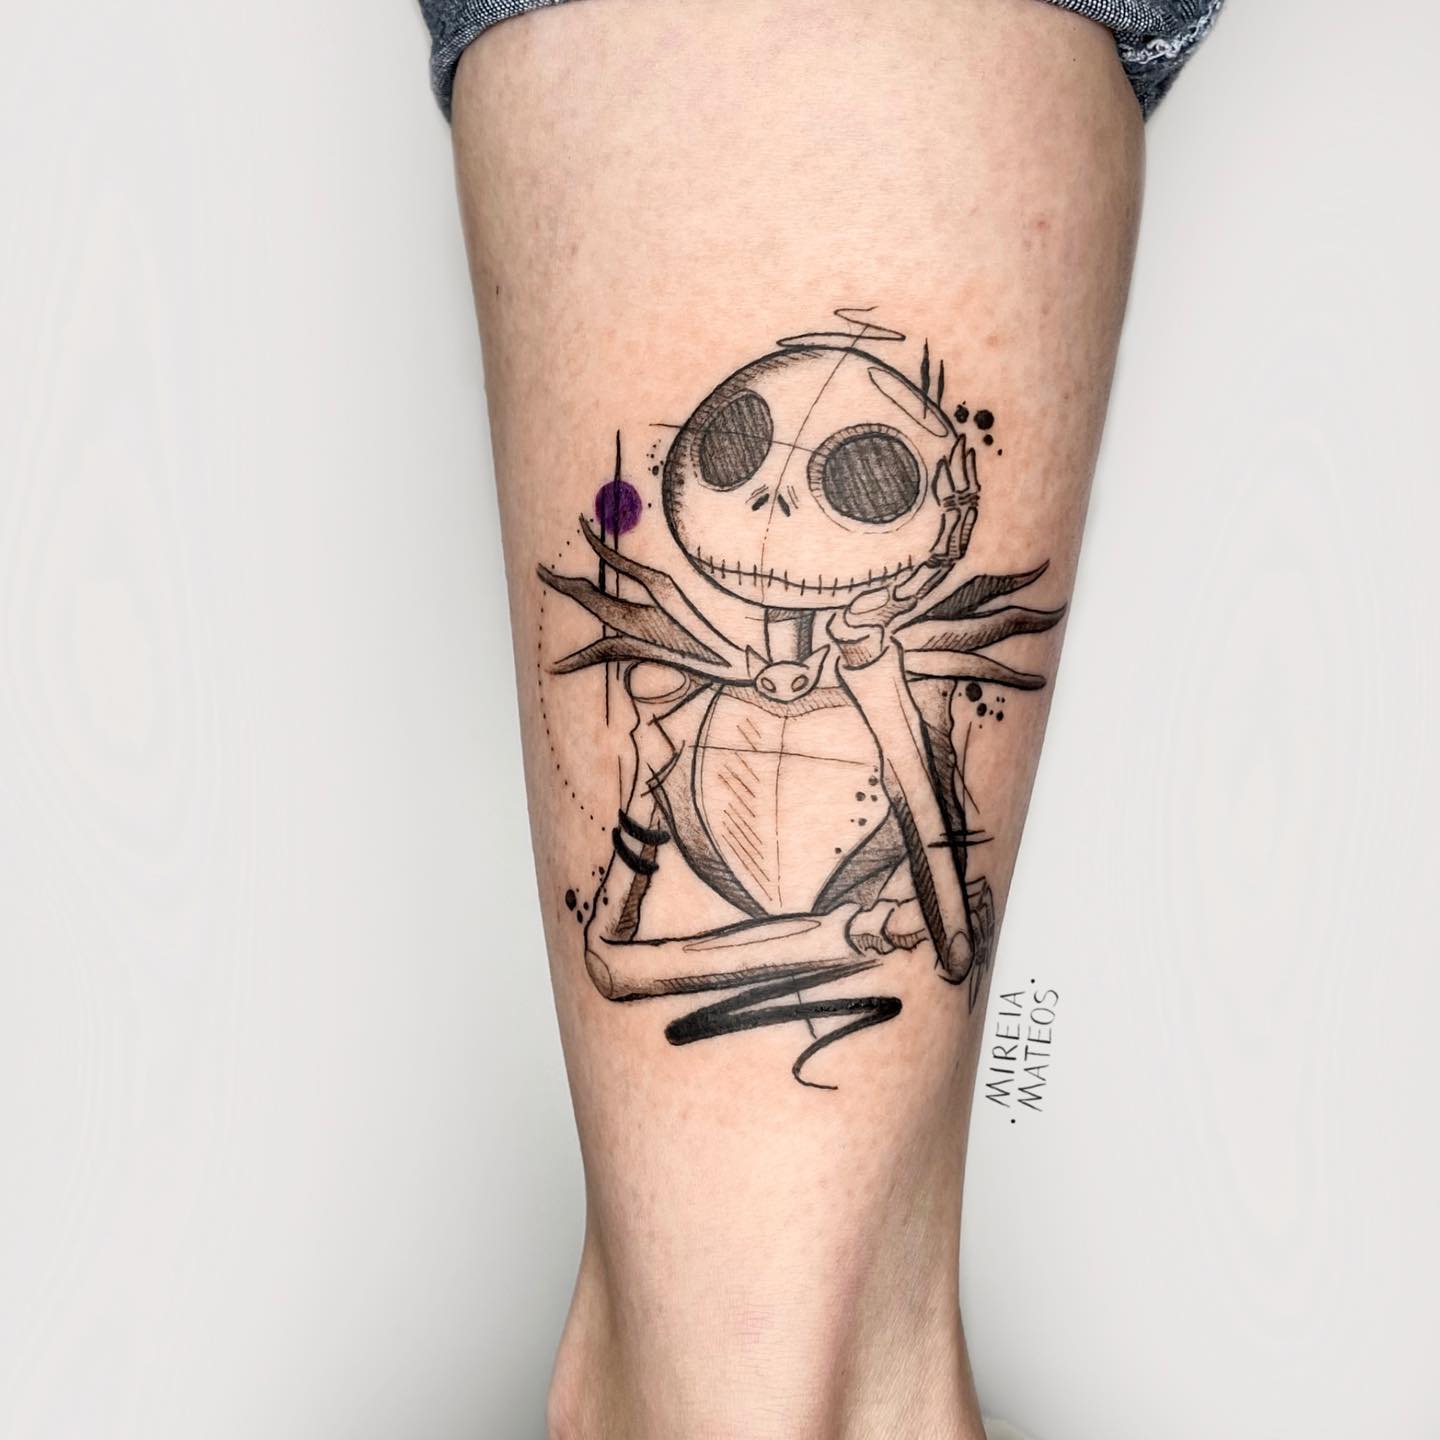 22 Amazing Nightmare Before Christmas Tattoo Ideas To Inspire You In ...